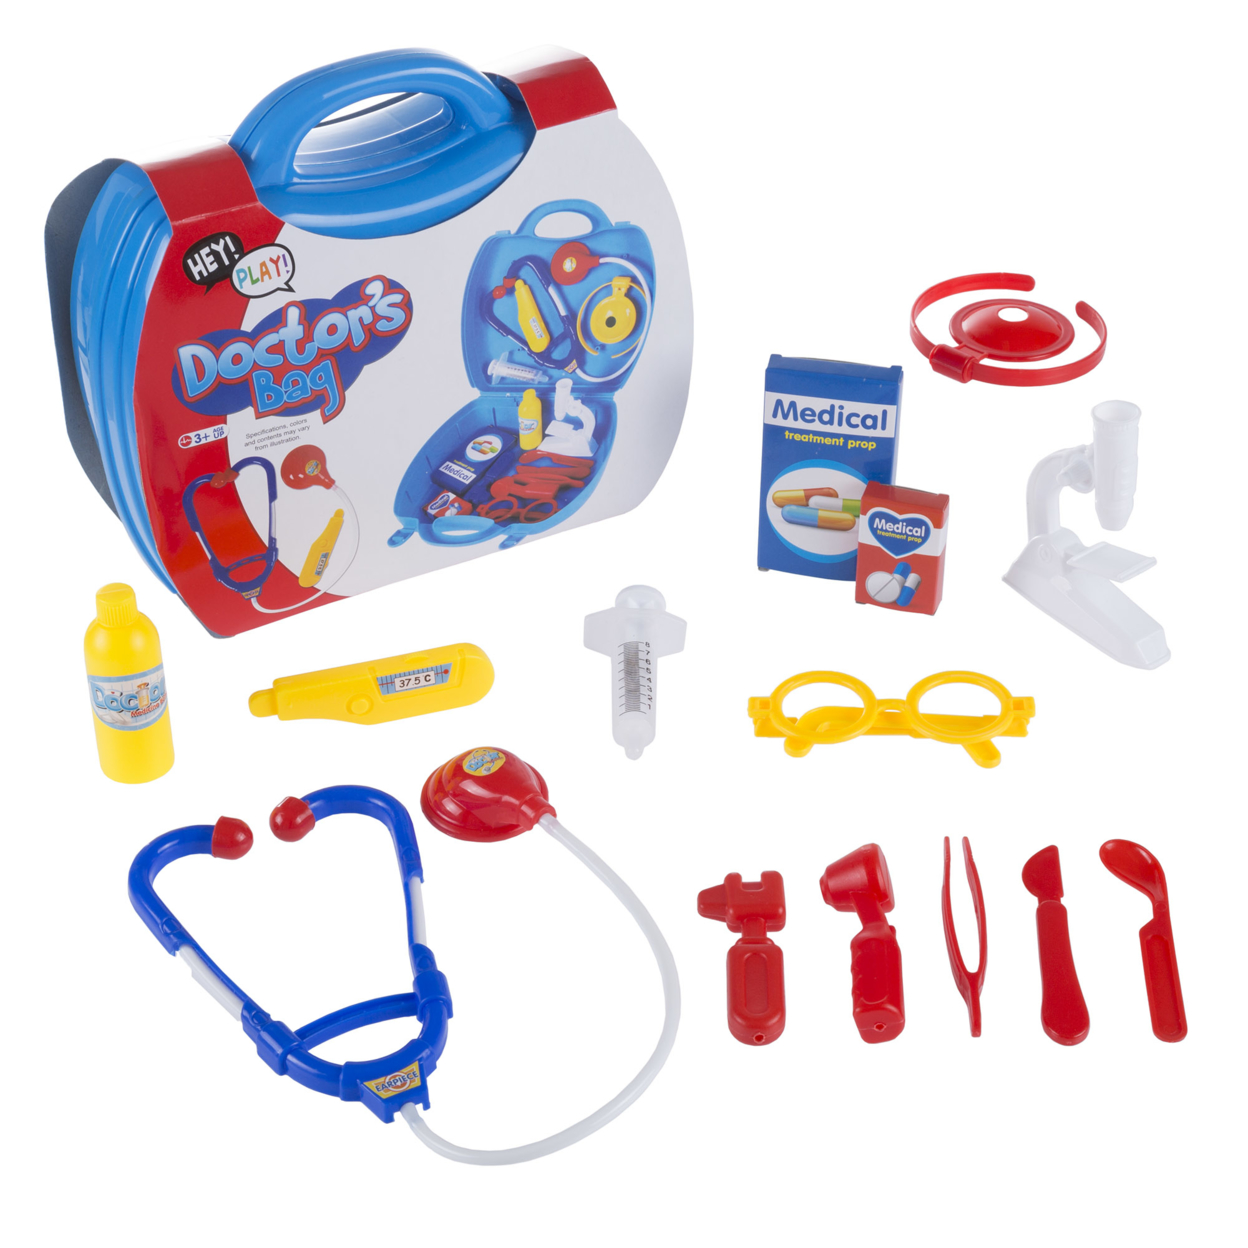 Doctor Kit For Kids - 15 Piece Complete Pretend Play Doctor Toy Set Including Carrying Case For Toddlers Boys And Girls By Hey! Play!